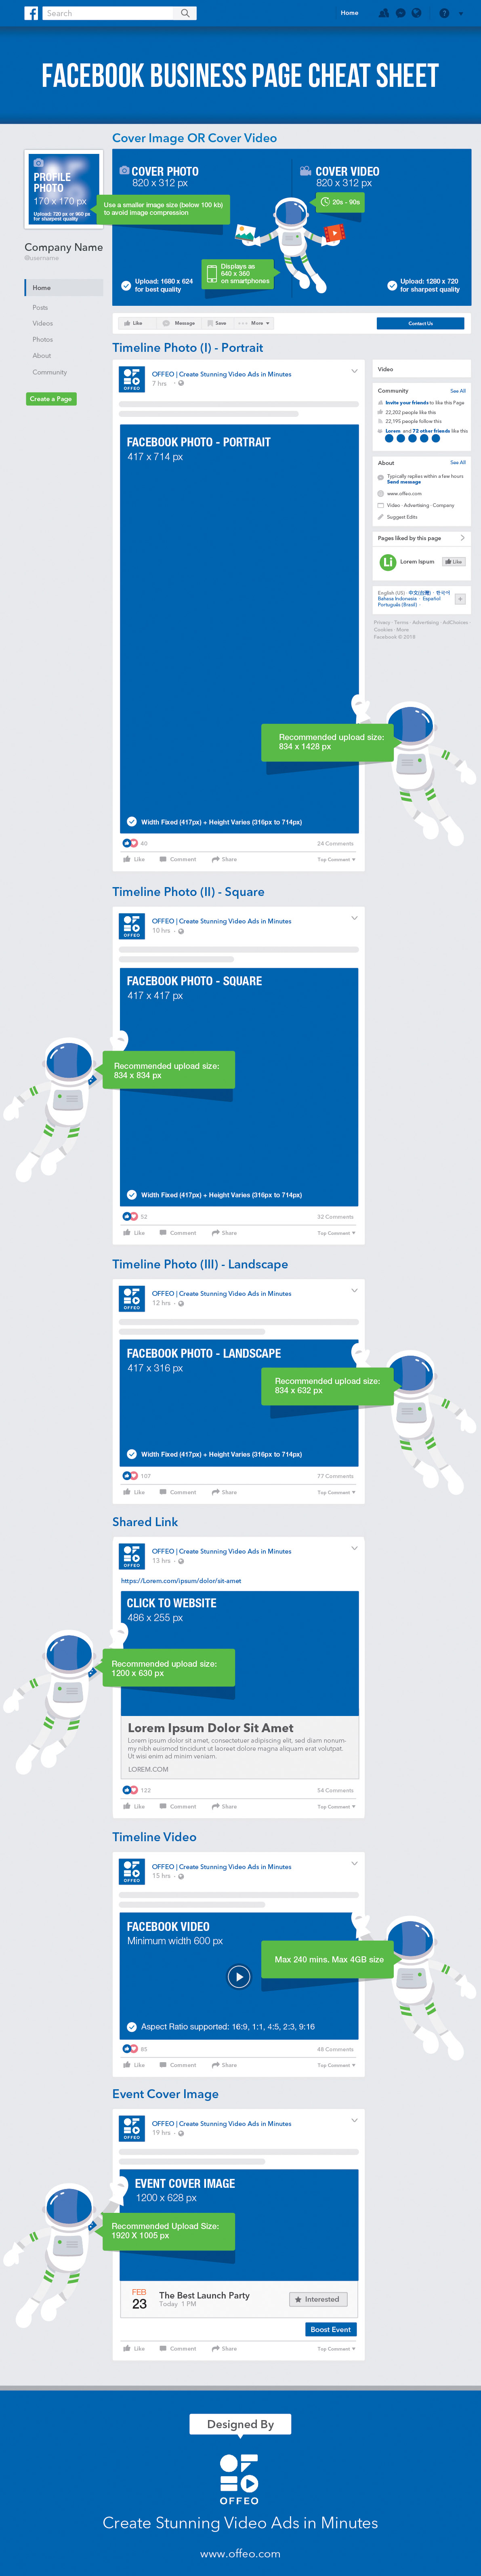 Facebook Cheat Sheet for Business Pages